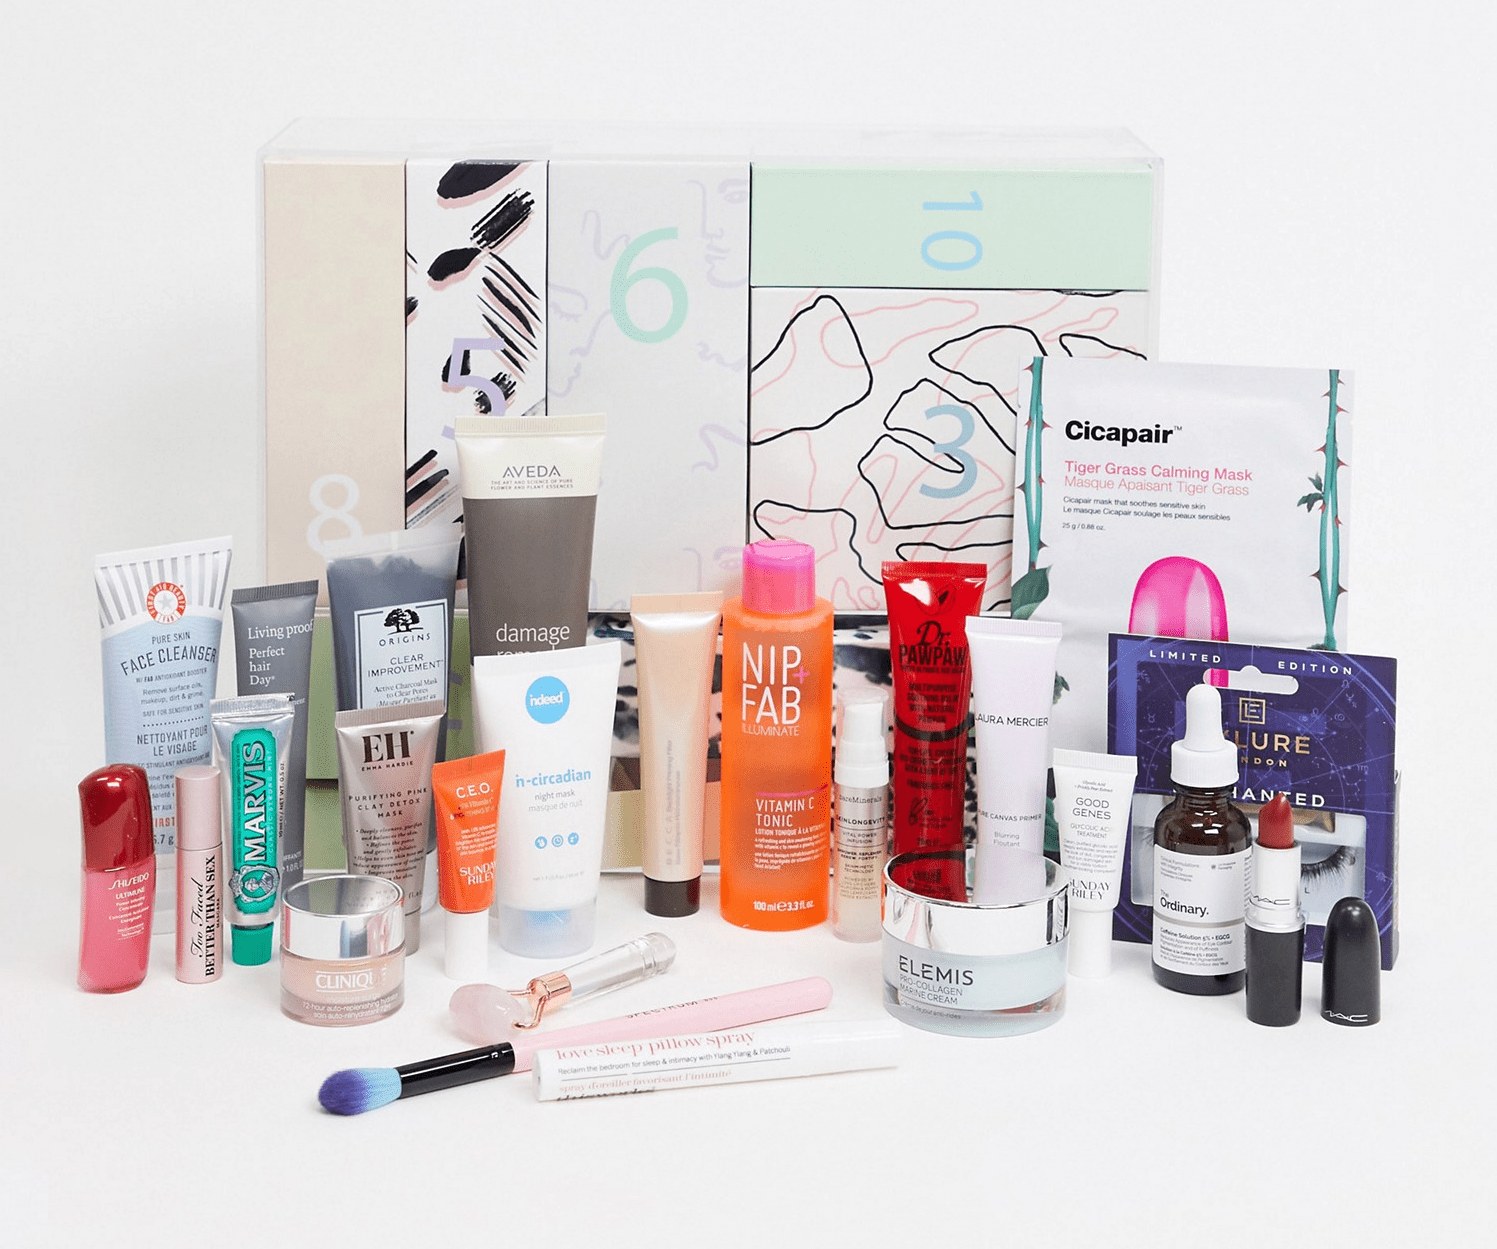 ASOS 2020 Beauty Advent Calendars Available Now + Full Spoilers! {UK